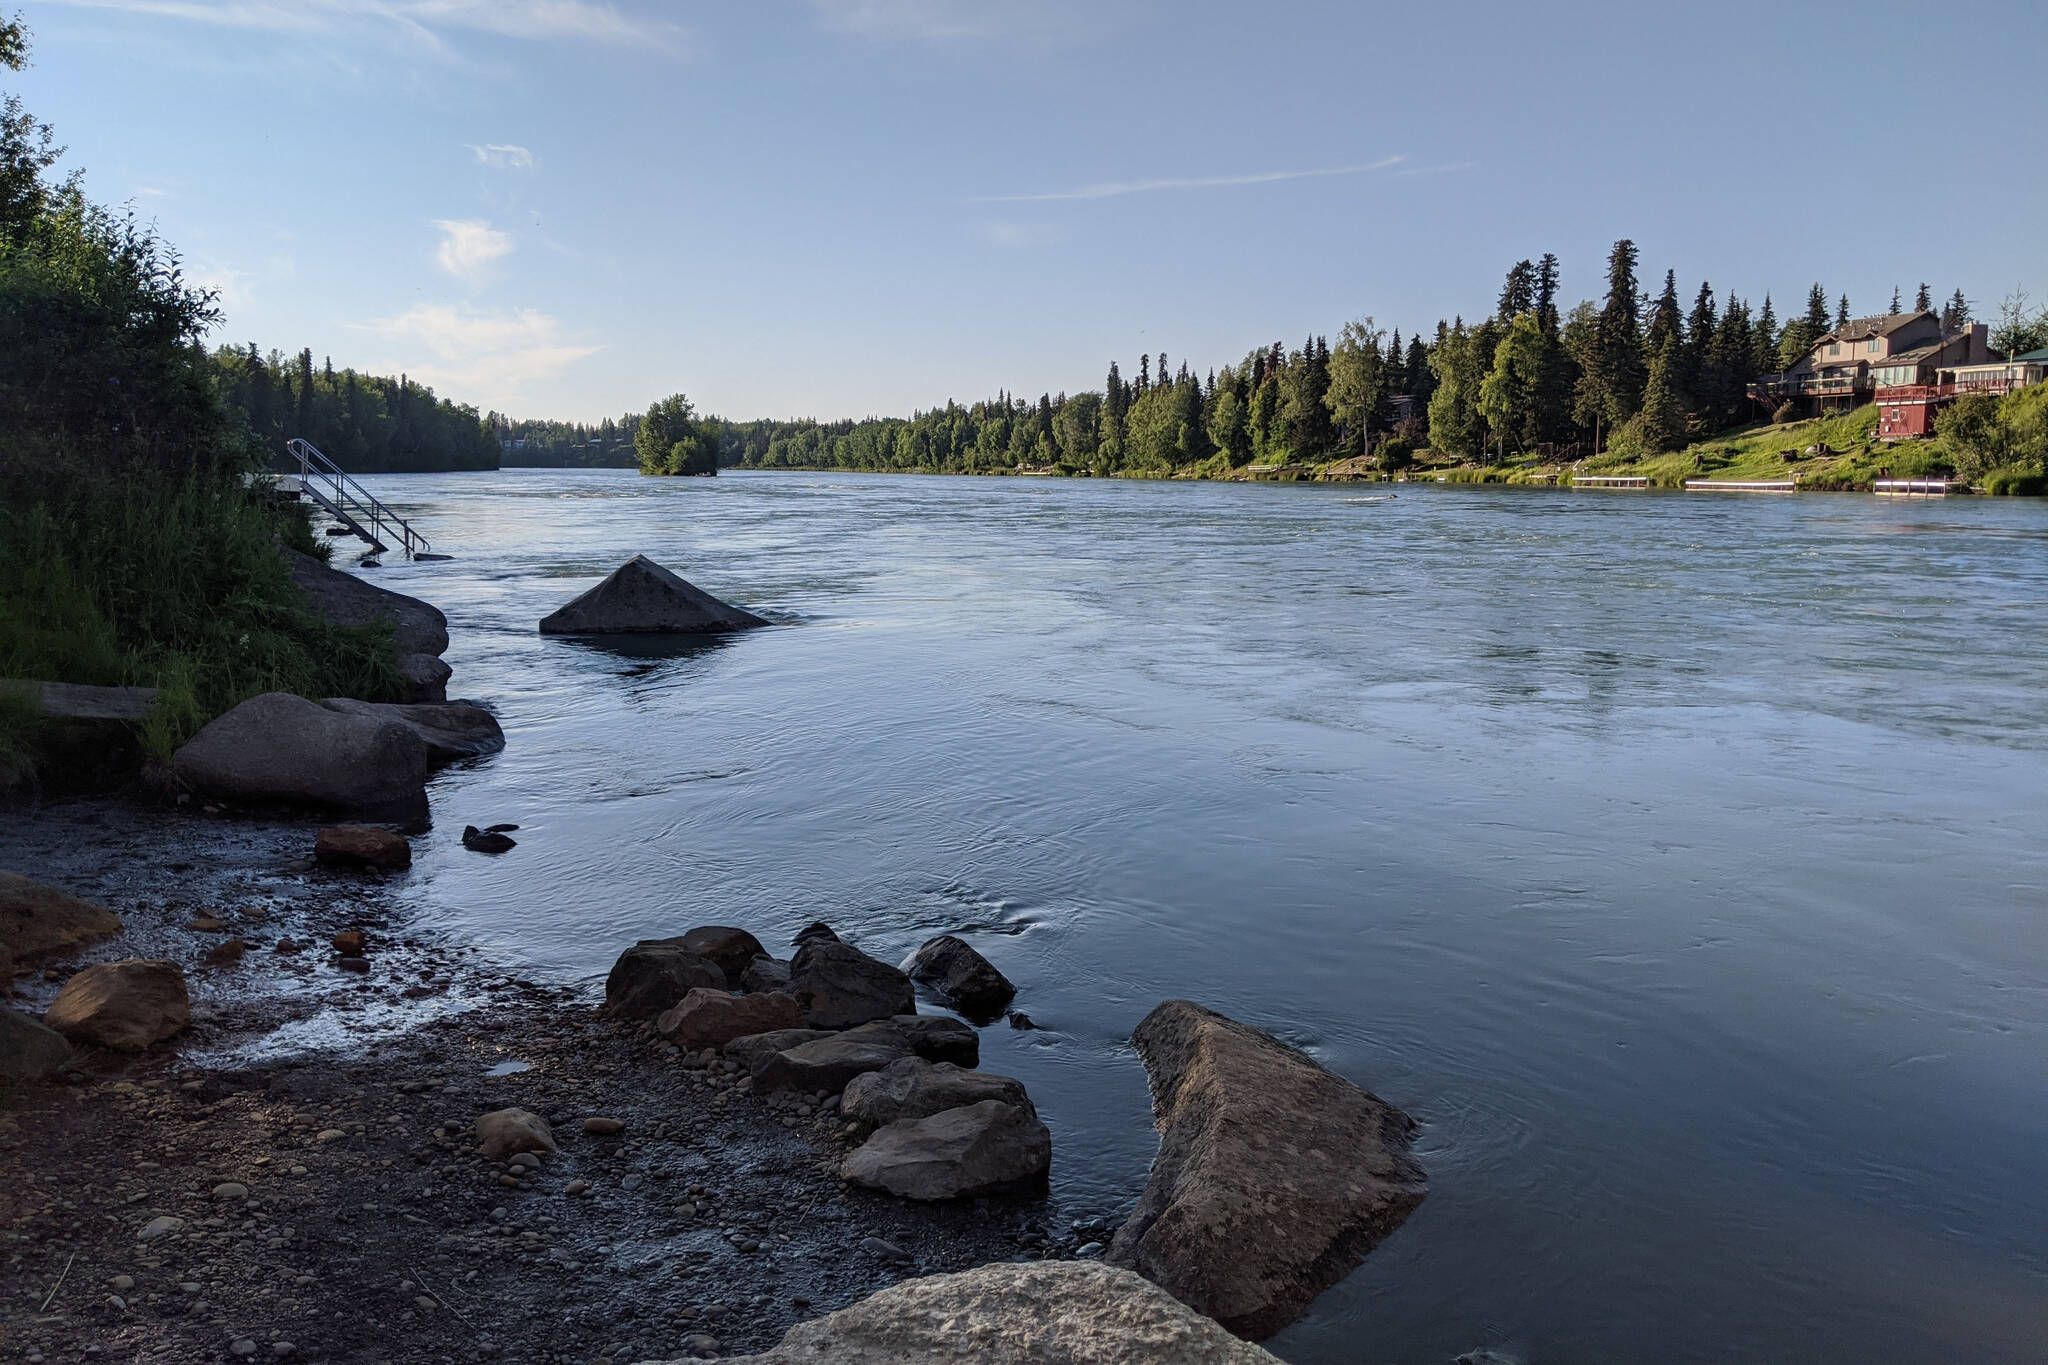 The banks of the Kenai River can be seen on July 14, 2020, in Soldotna, Alaska. (Photo by Erin Thompson/Peninsula Clarion)